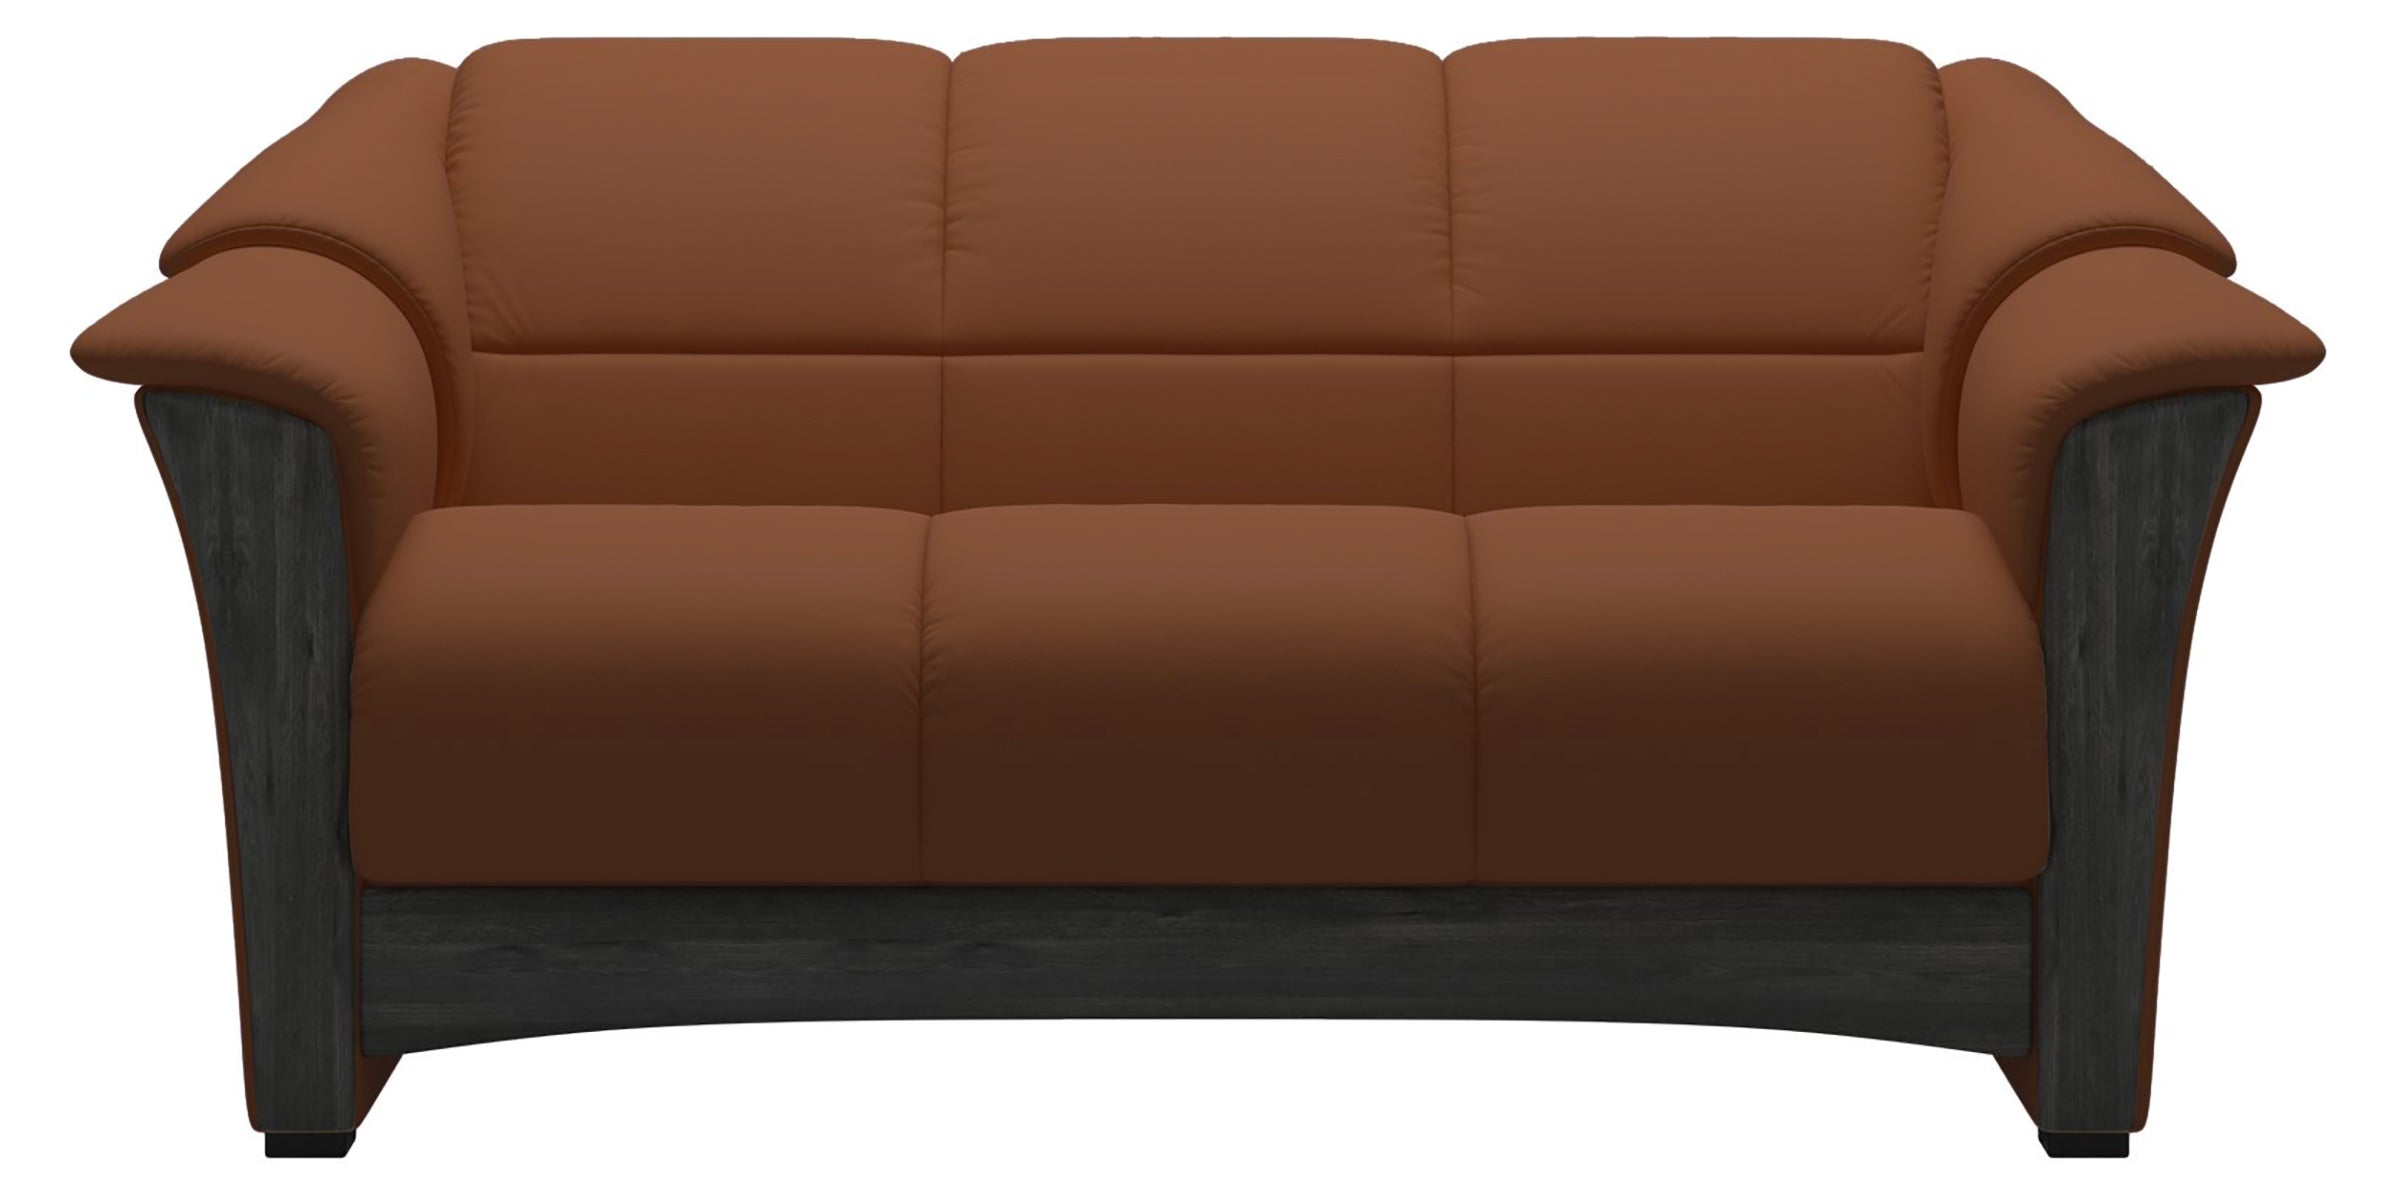 Paloma Leather New Cognac and Grey Base | Stressless Oslo Loveseat | Valley Ridge Furniture